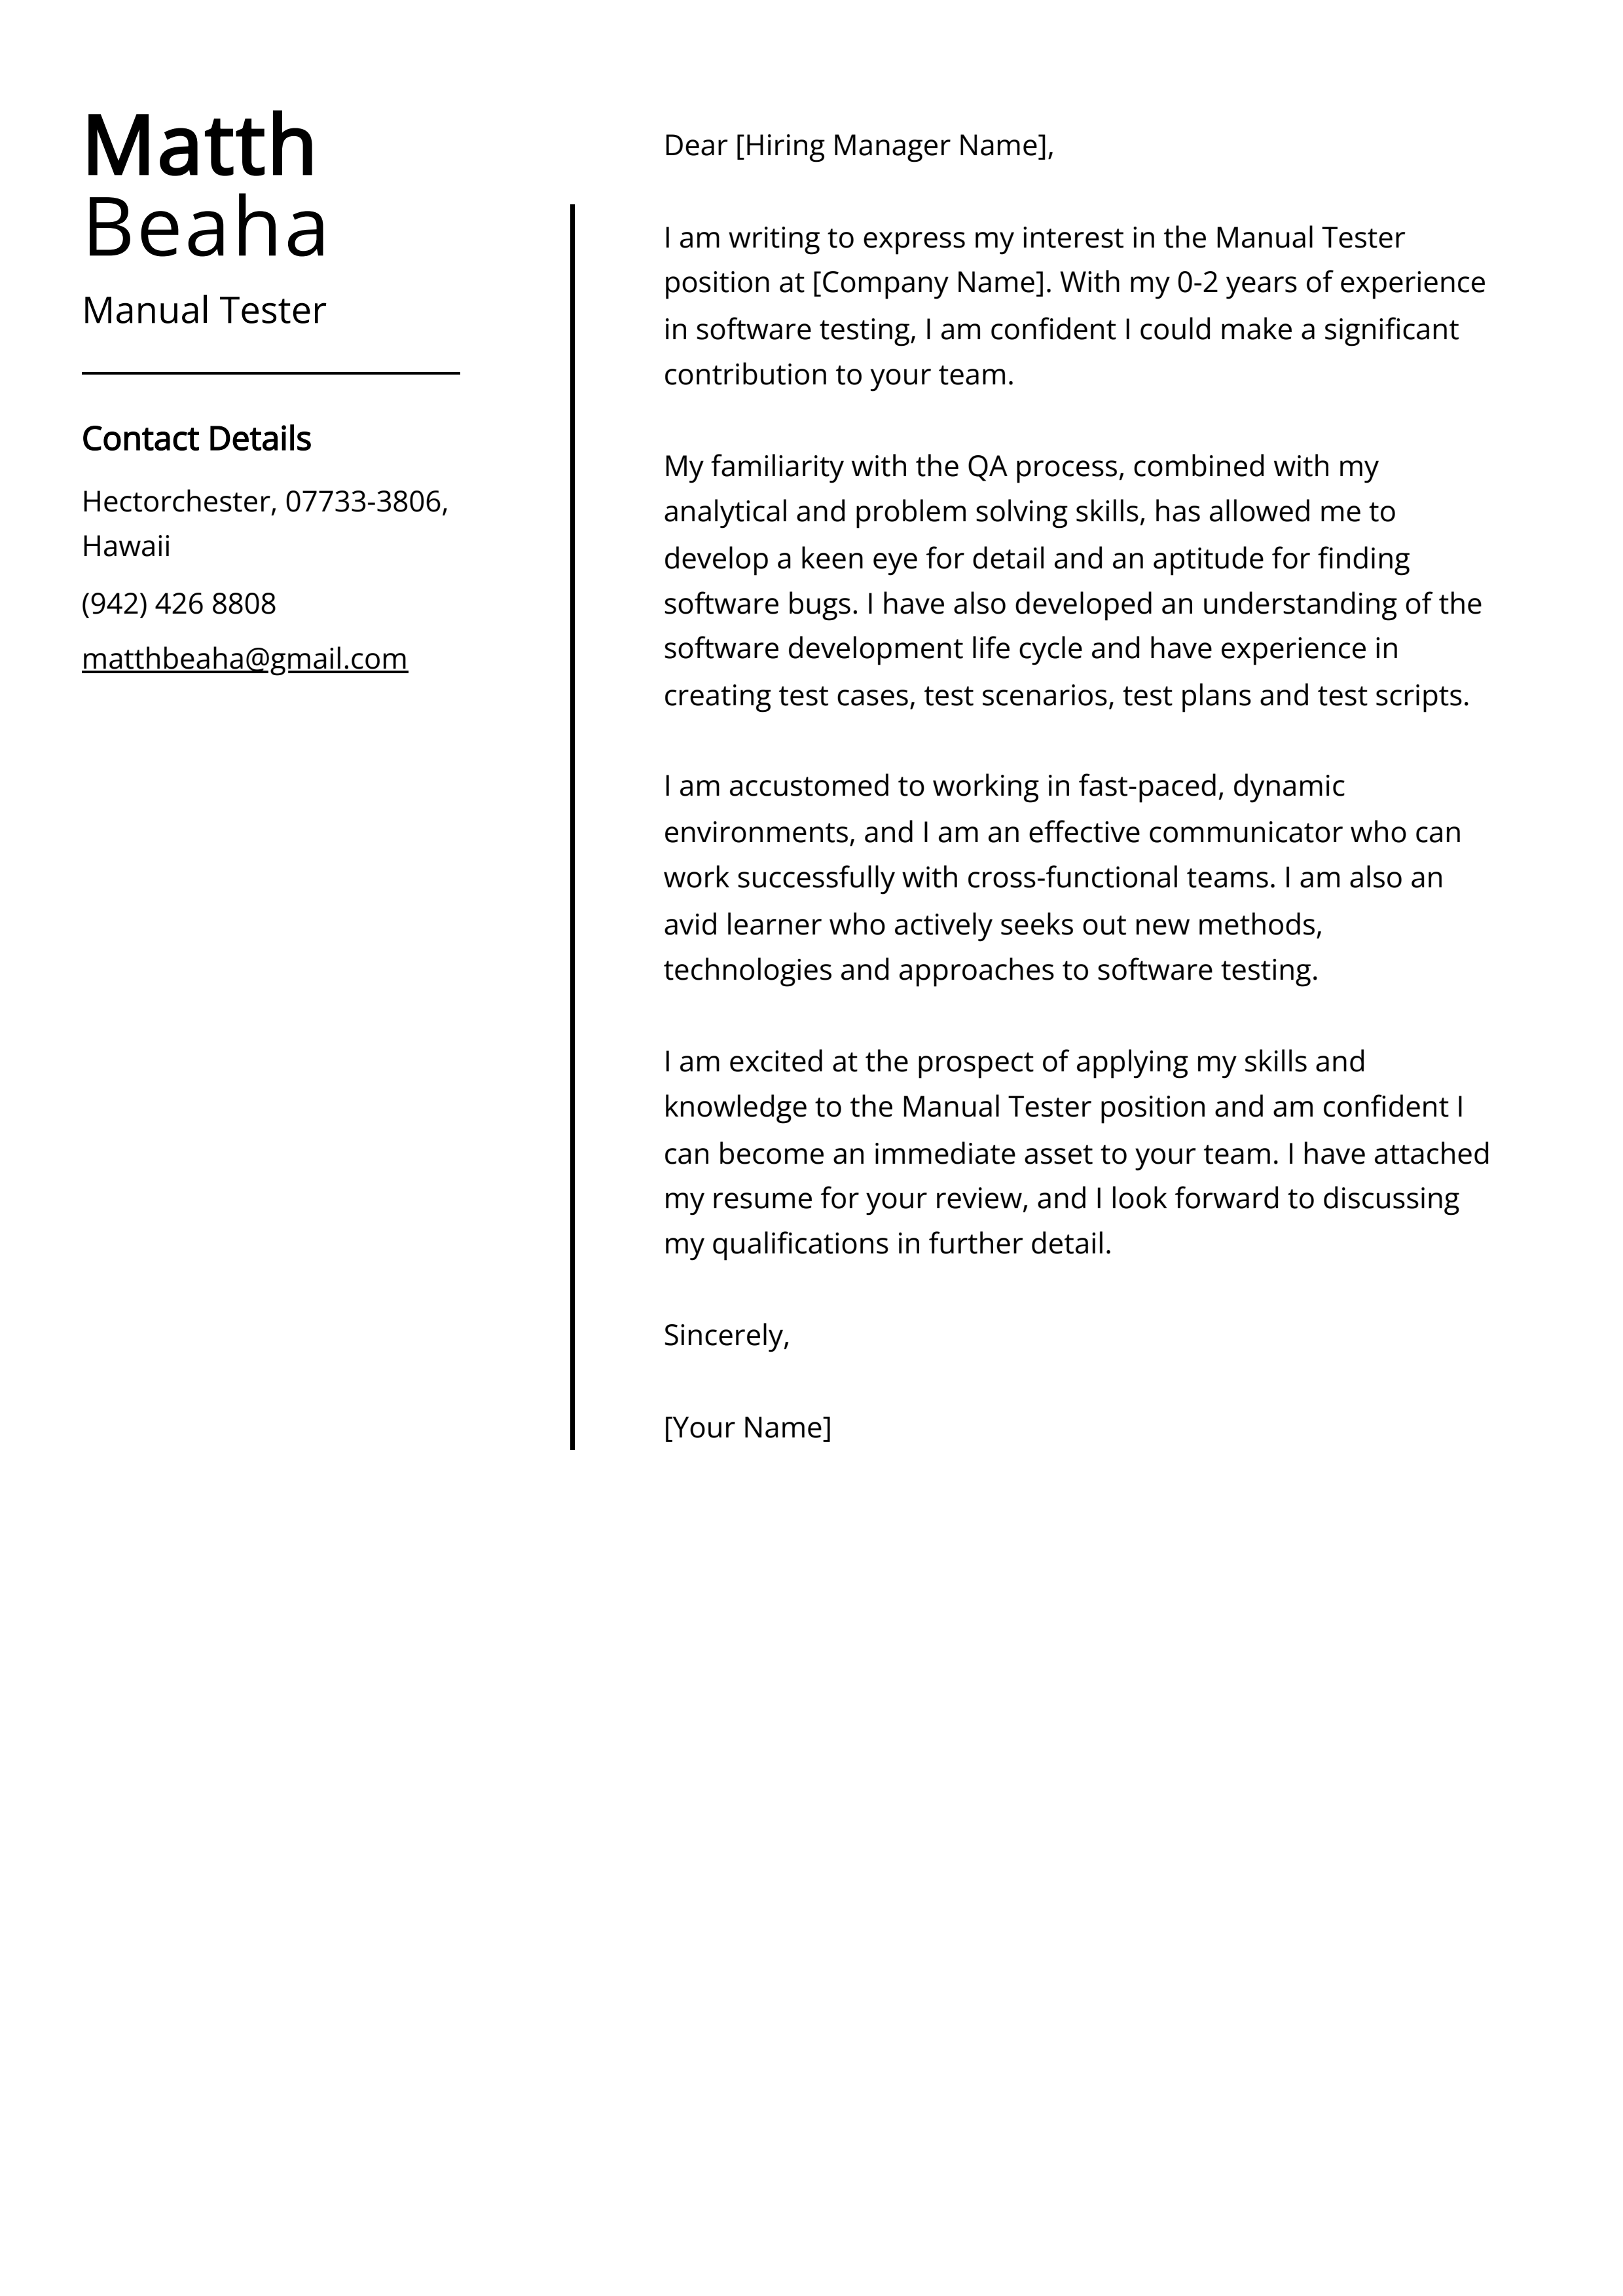 Manual Tester Cover Letter Example